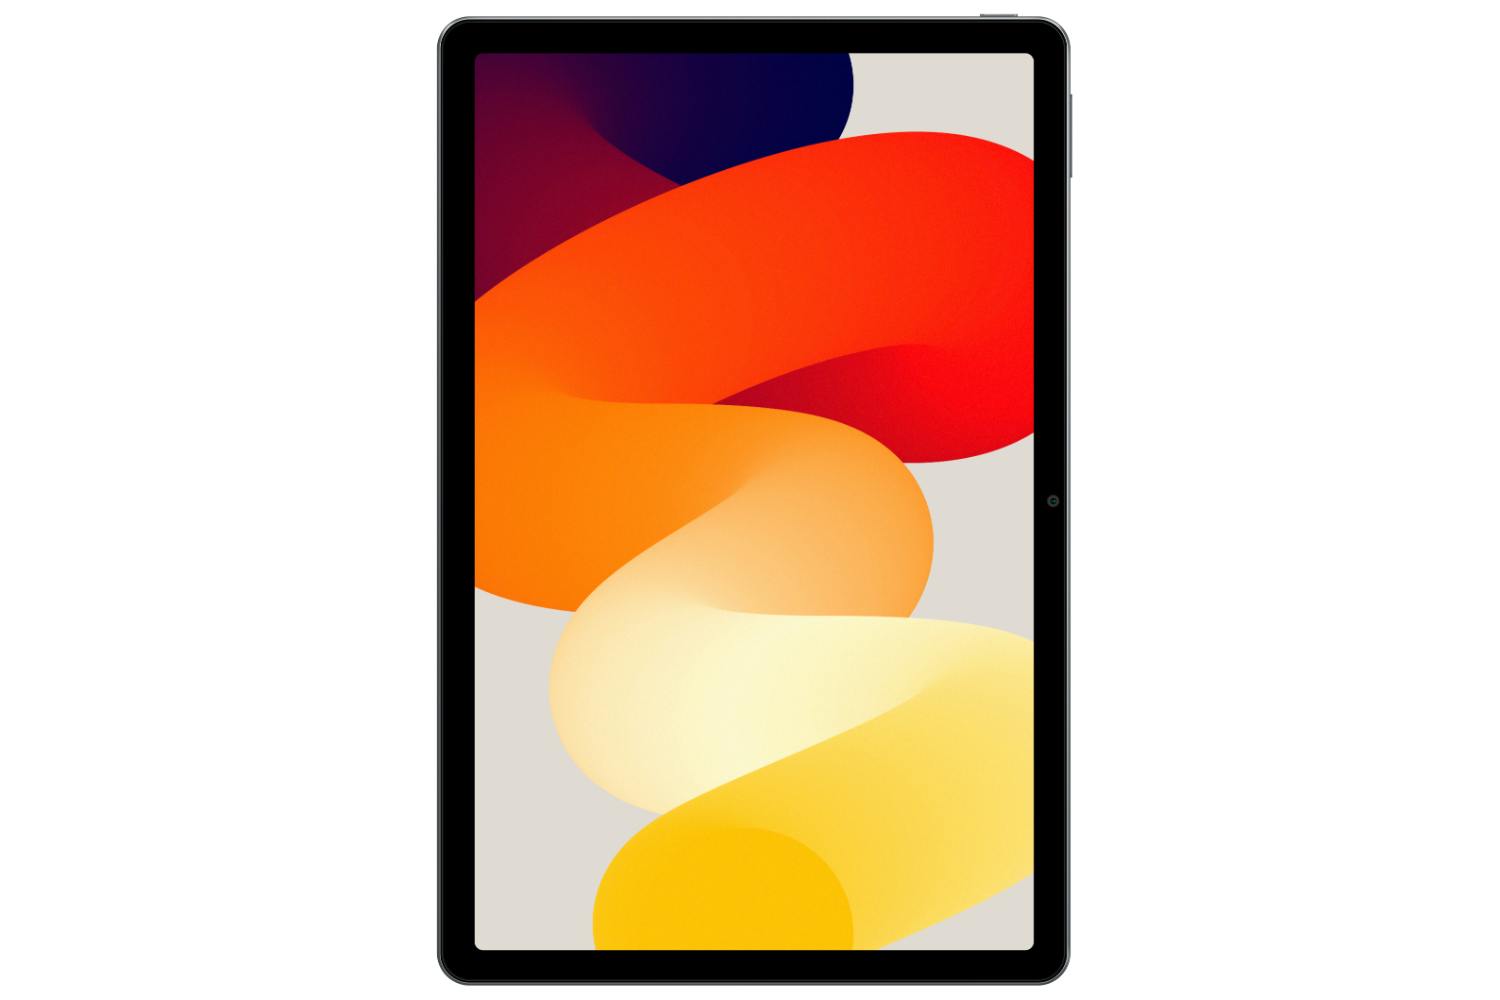 Redmi Pad SE 8GB 256GB for sale in Co. Dublin for €249 on DoneDeal